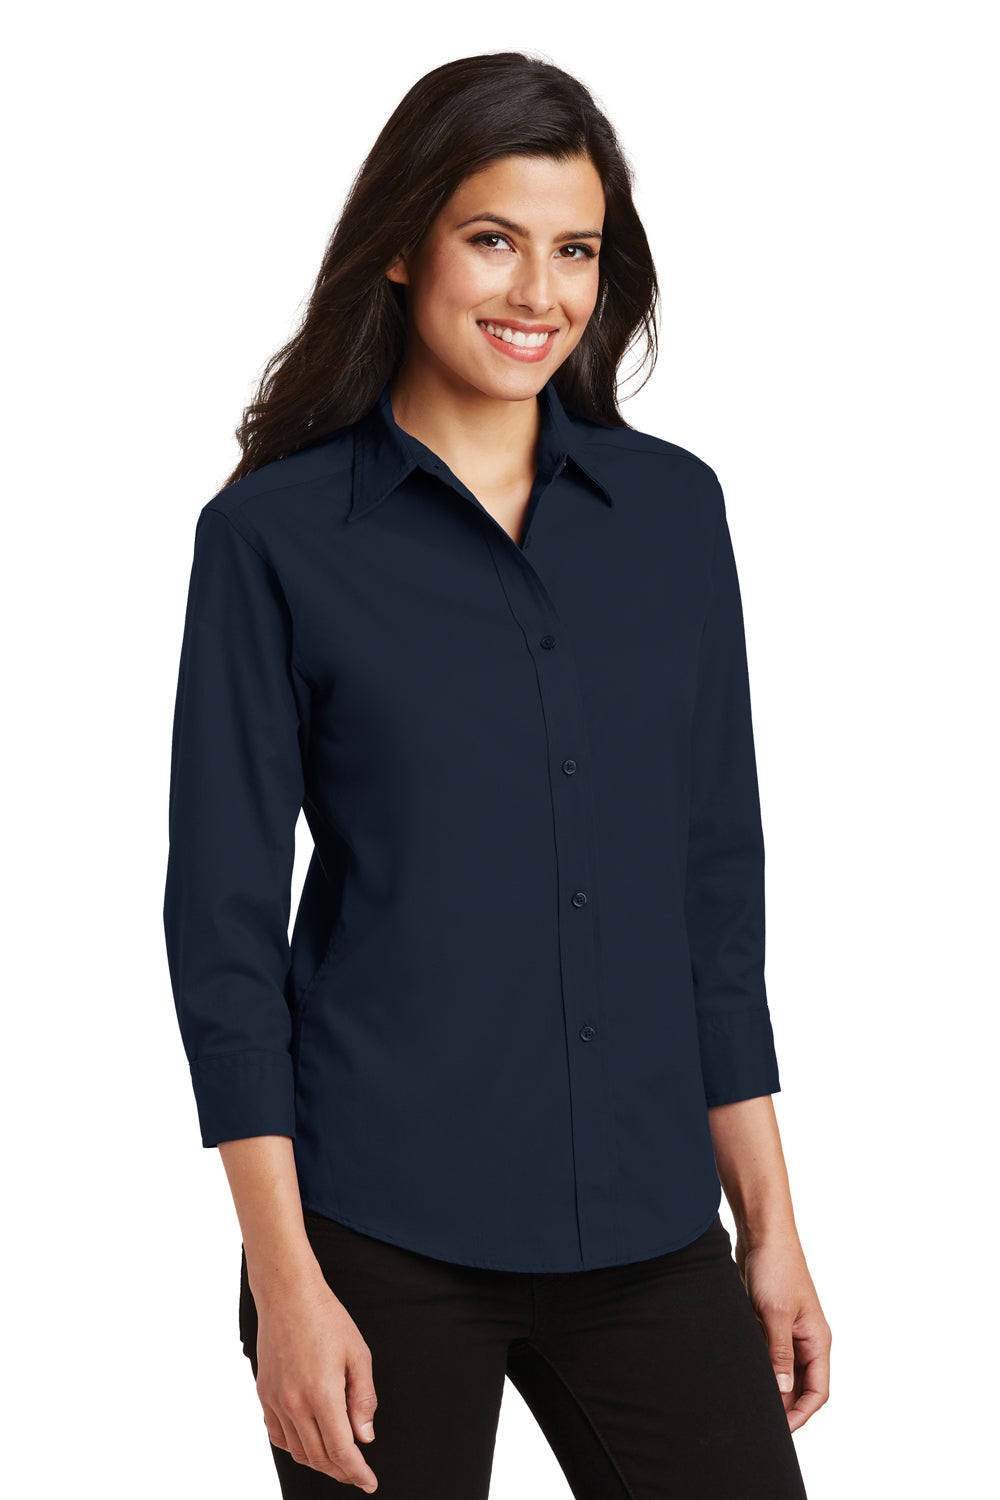 Port Authority L612 Womens Easy Care Wrinkle Resistant 3/4 Sleeve Button Down Shirt Navy Blue 3Q